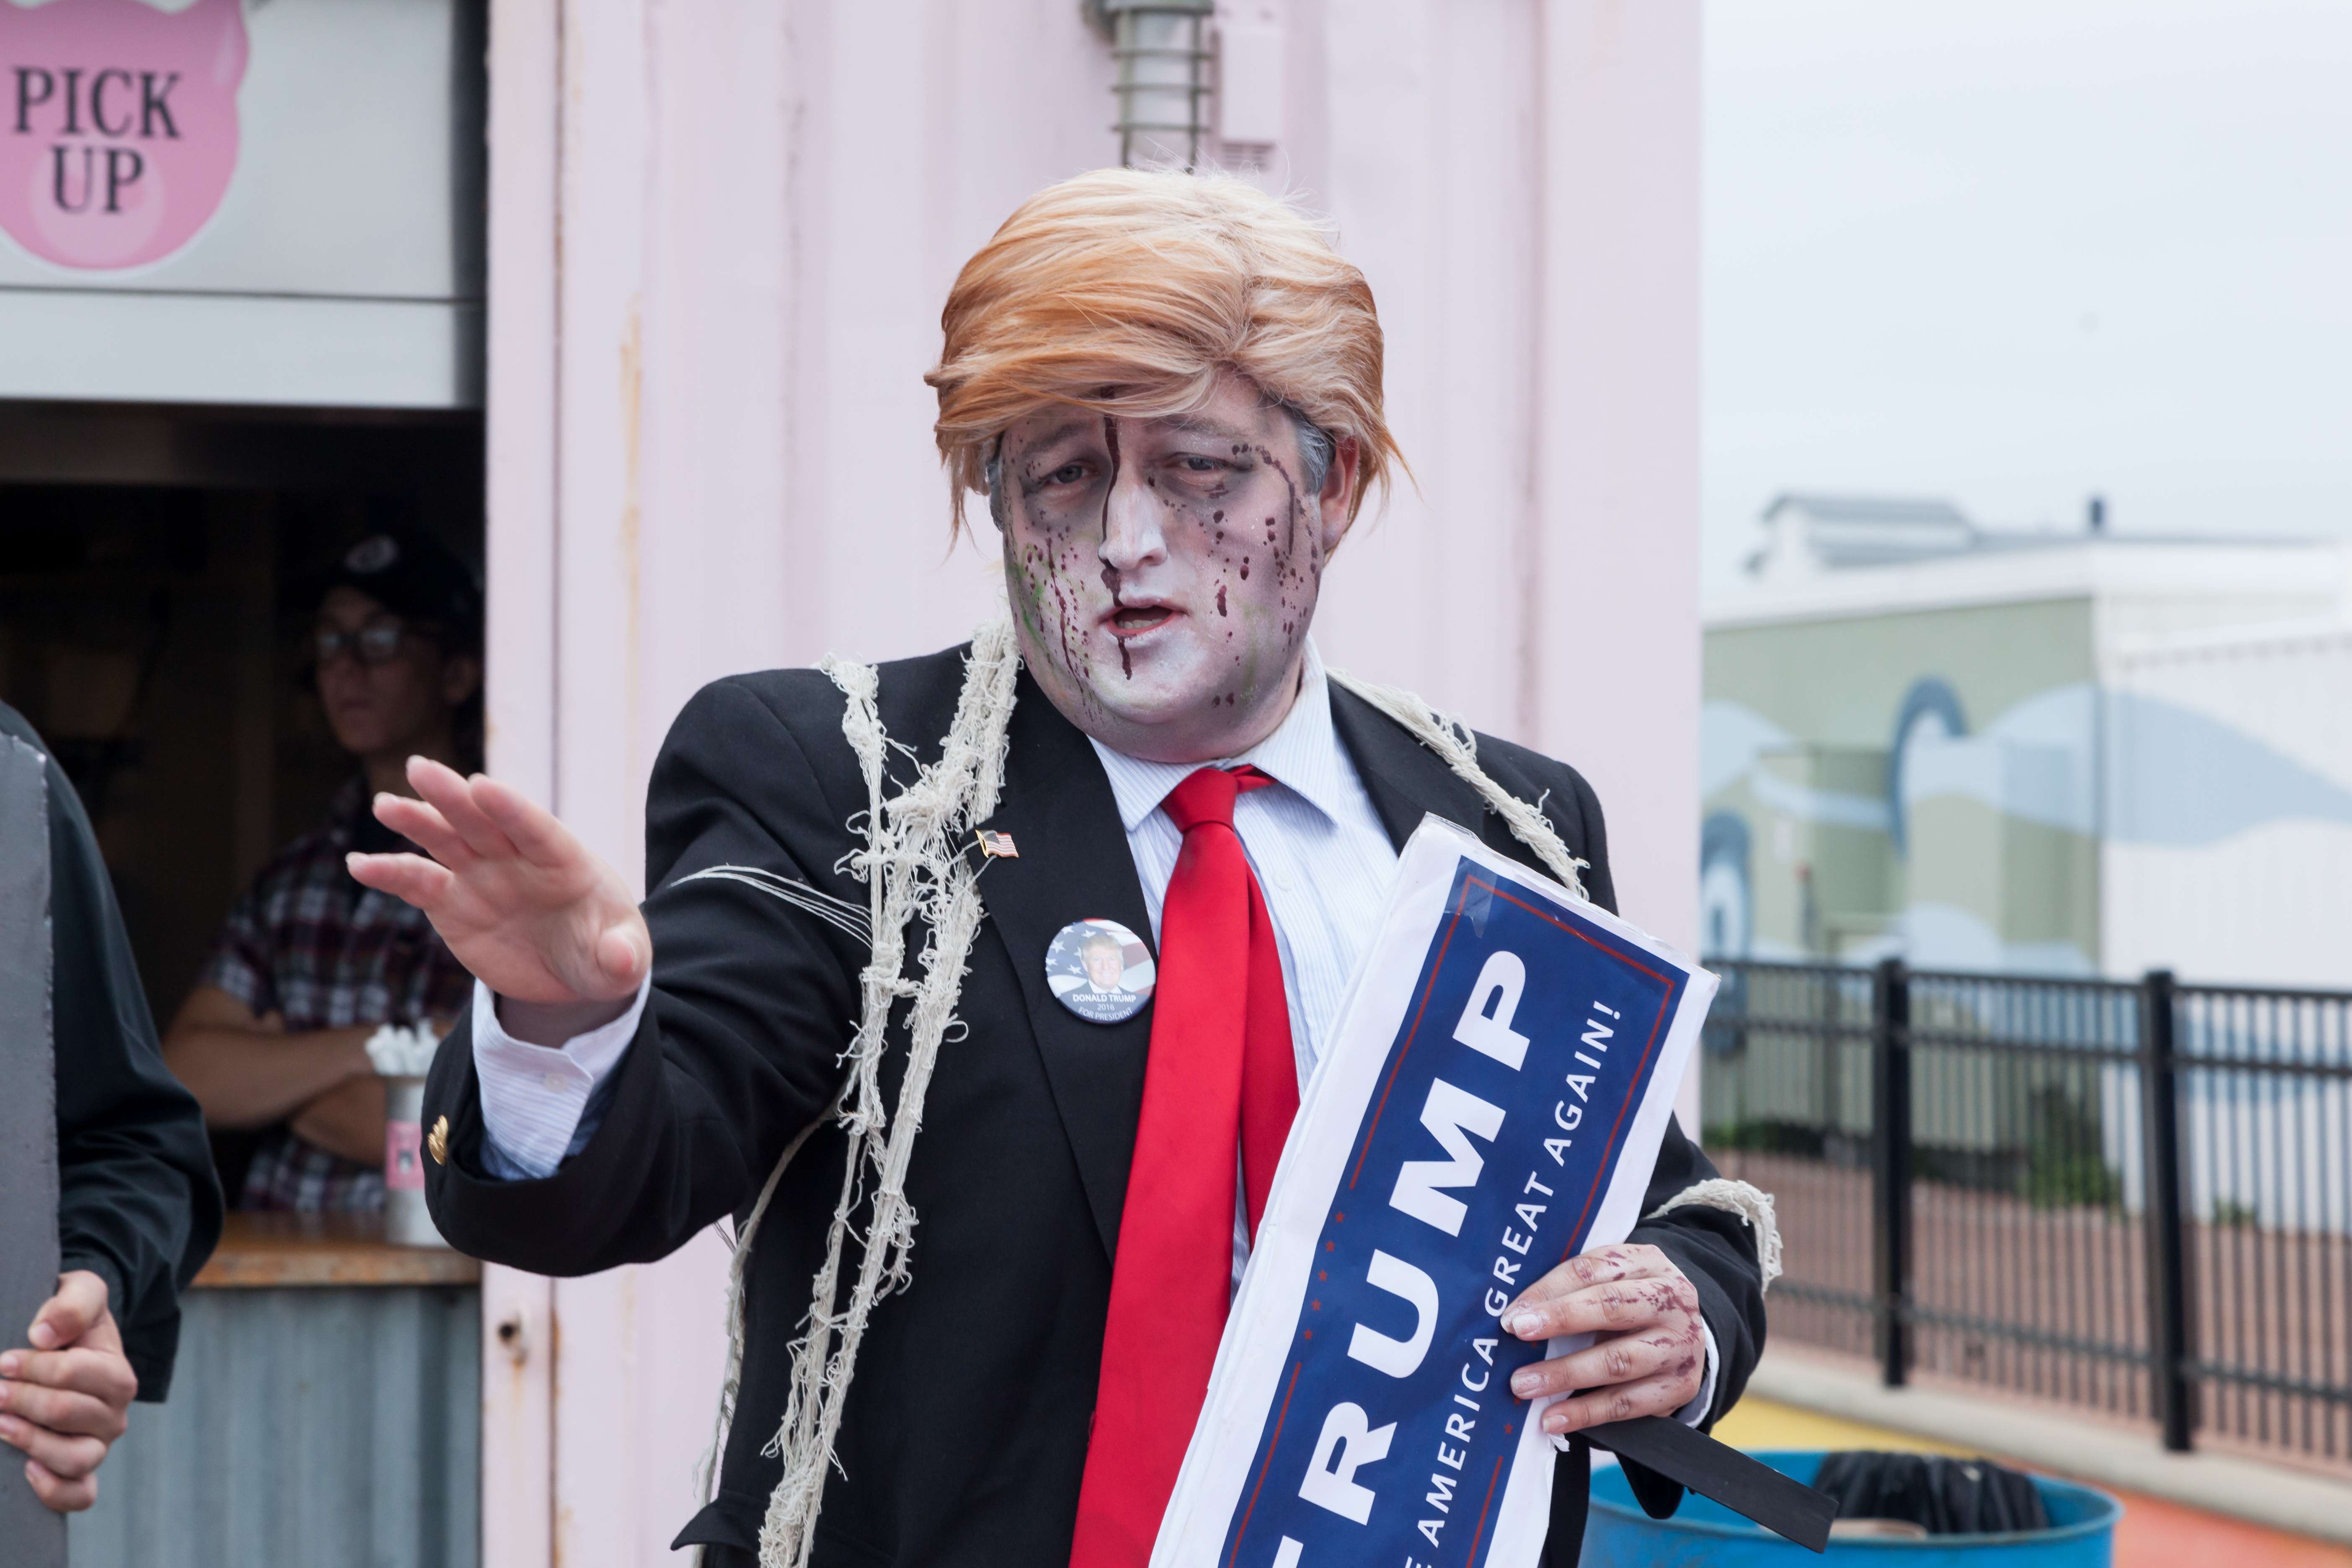 Haunted jail cells, a gender-bending masquerade ball, bloody waltzes … and most terrifying of all: US President Donald Trump. Hong Kong’s got it all this Halloween